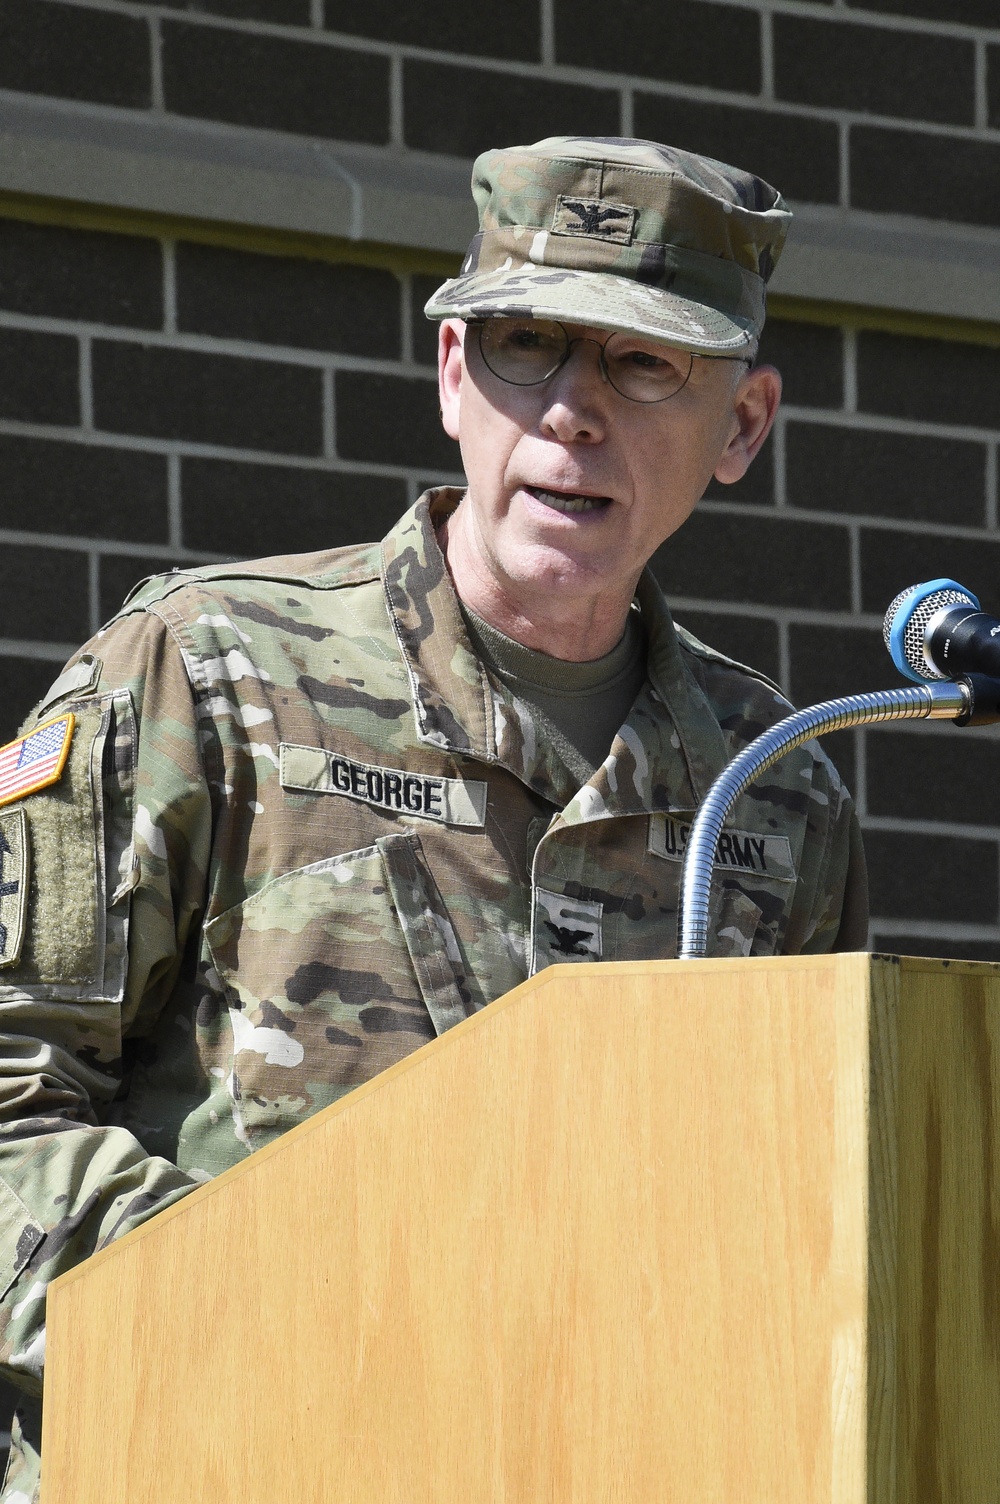 New leader takes command of Red Arrow Brigade